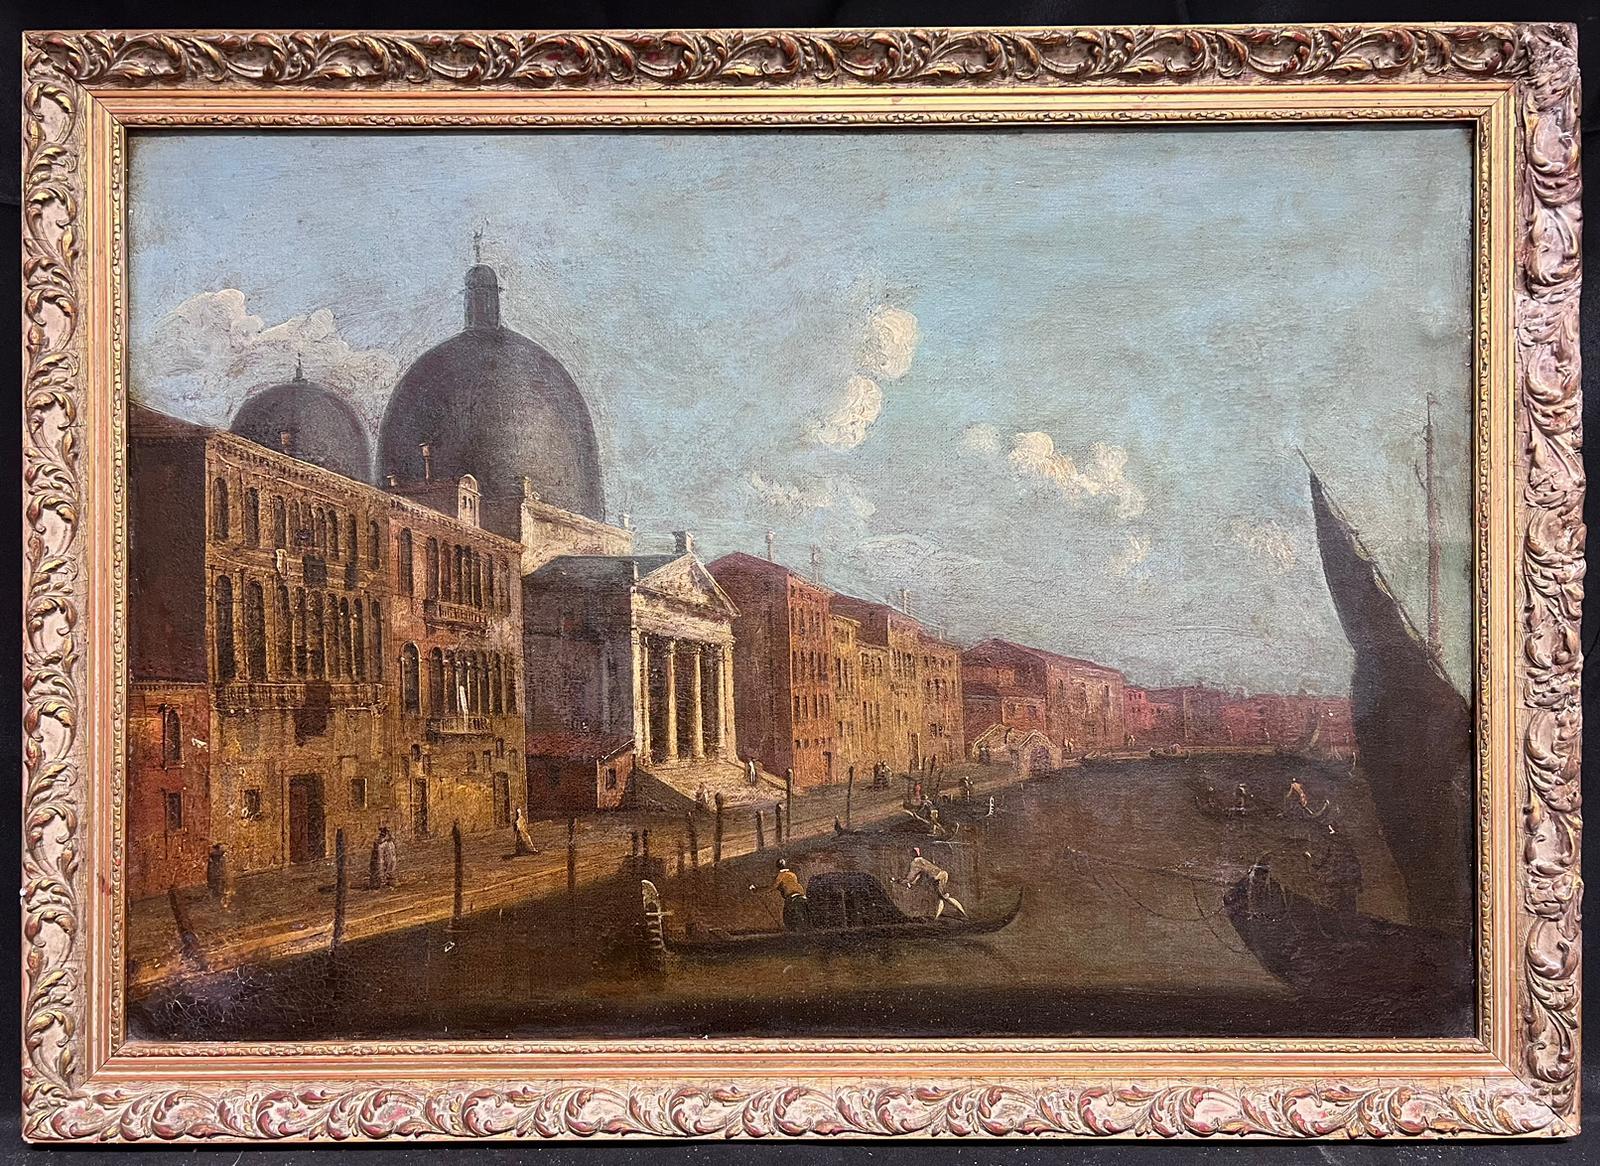 Large 18th Century Italian Oil Painting Venice Canal Many Buildings & Figures - Gray Landscape Painting by Francesco Guardi